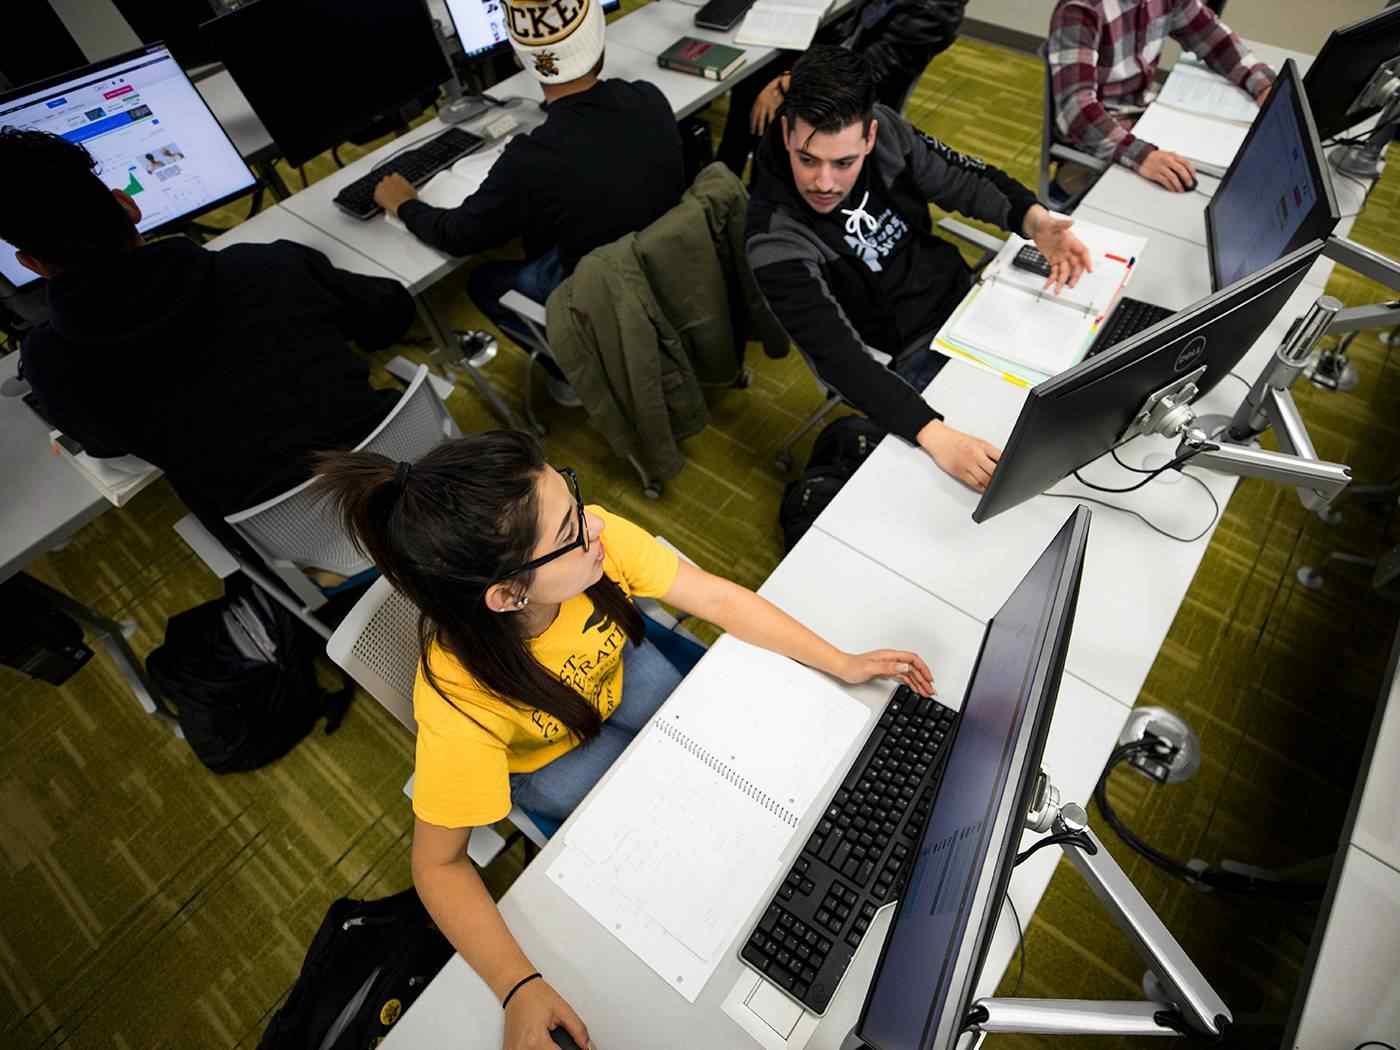 Students working in a business computer lab classroom